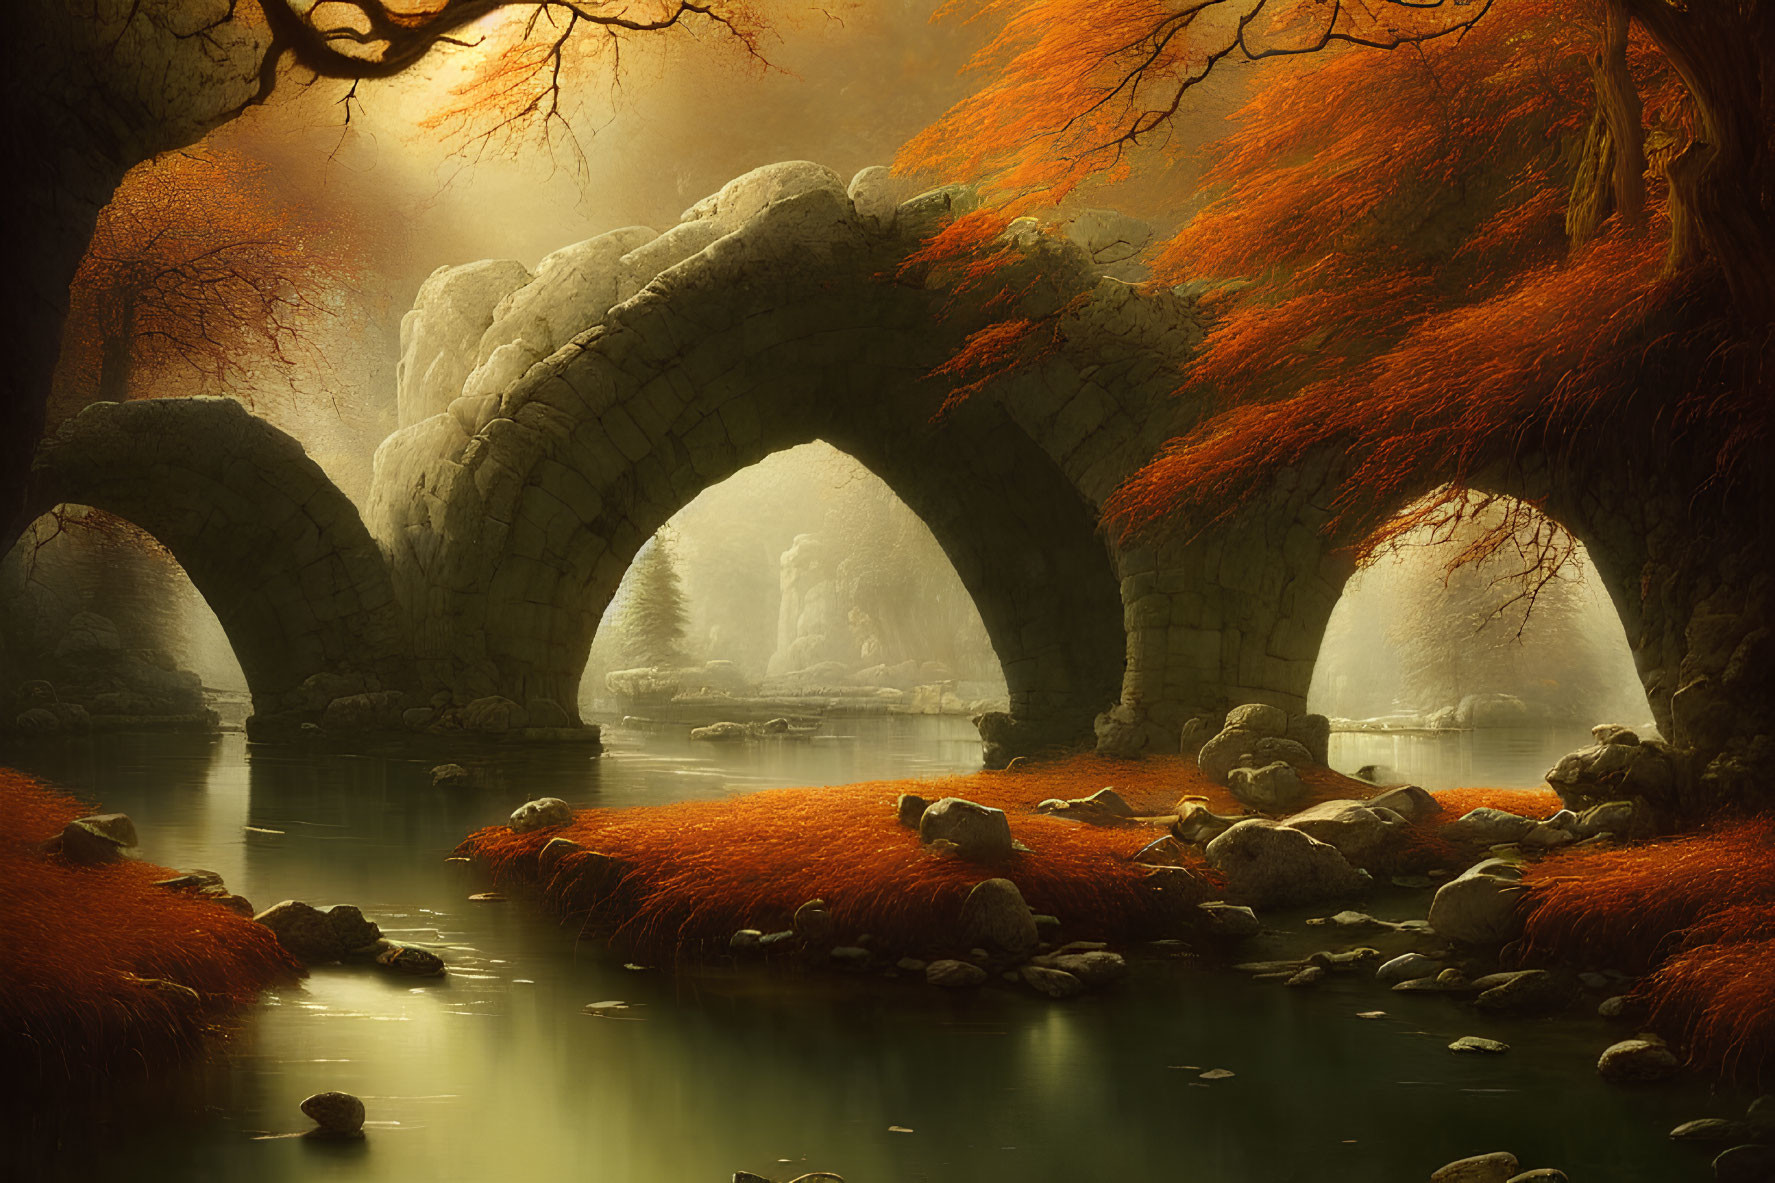 Ethereal autumn landscape with stone bridge, calm river, red foliage trees